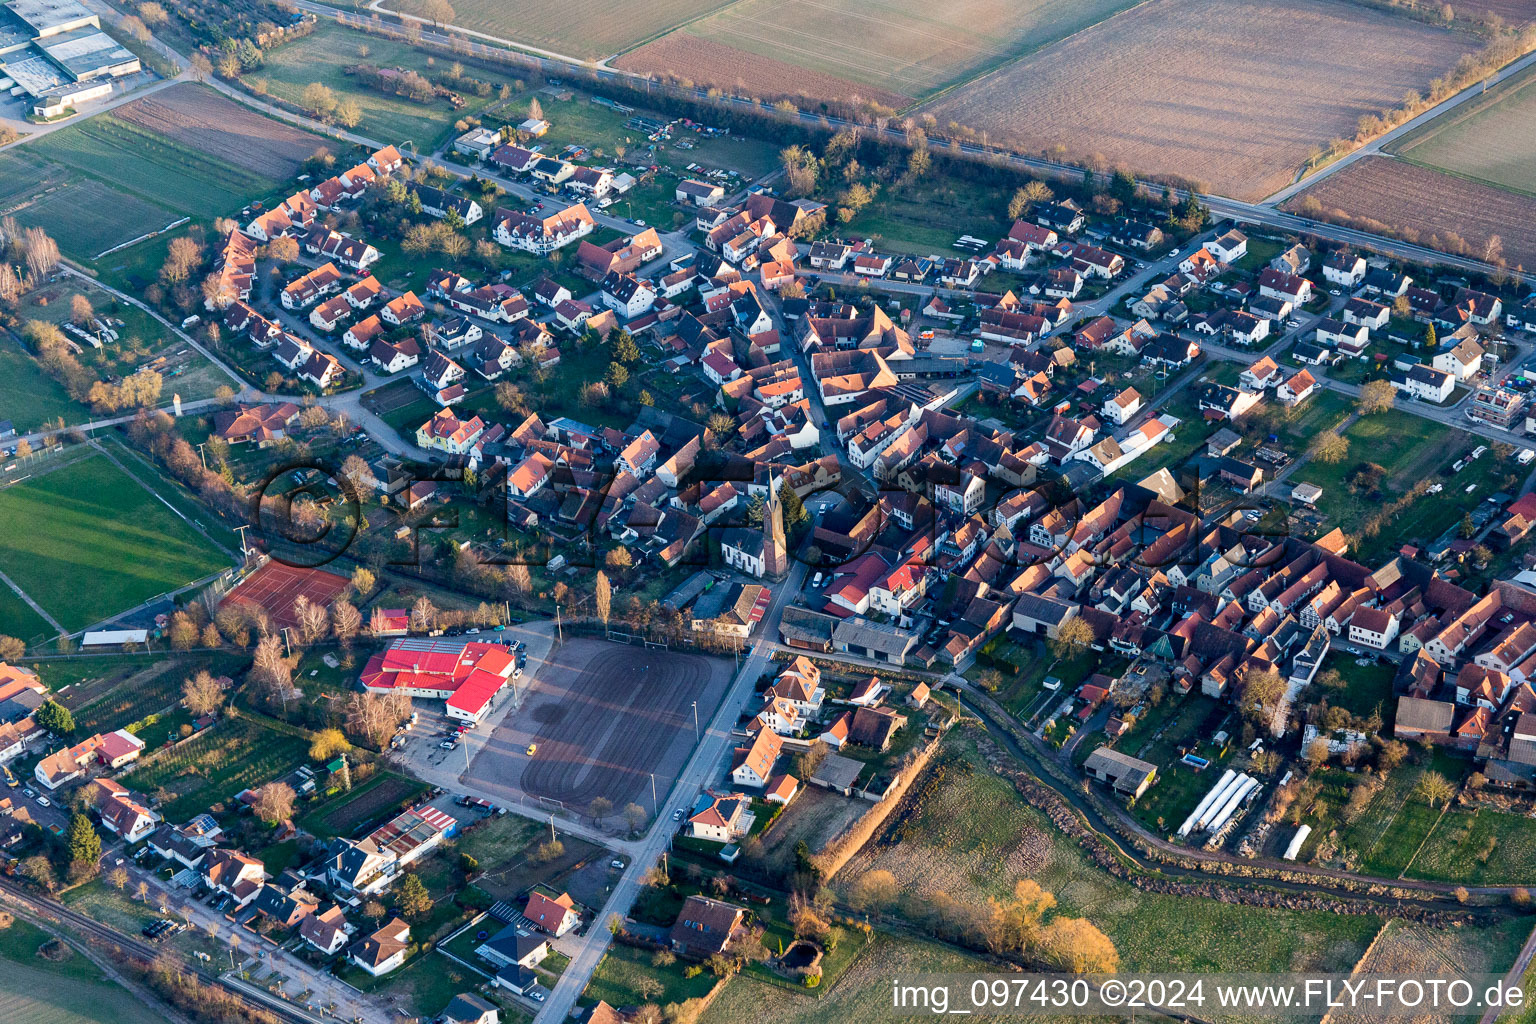 Fairground in the district Drusweiler in Kapellen-Drusweiler in the state Rhineland-Palatinate, Germany from above